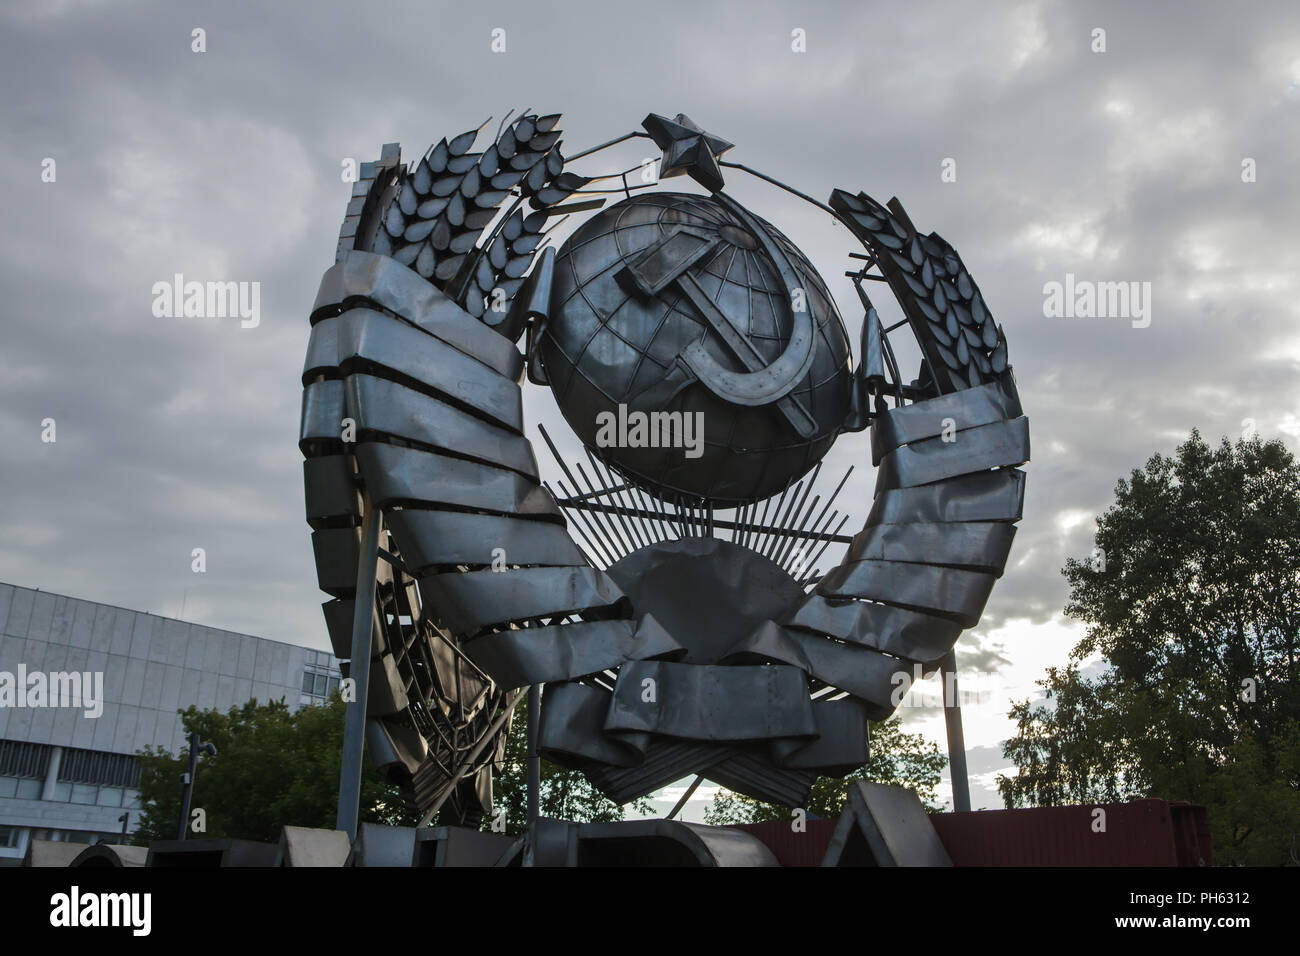 State Emblem of the Soviet Union designed by Soviet sculptor Stepan Schekotikhin on display in the Muzeon Fallen Monument Park in Moscow, Russia. The huge stainless state emblem was previously instated in Leninsky Avenue in Moscow. Stock Photo